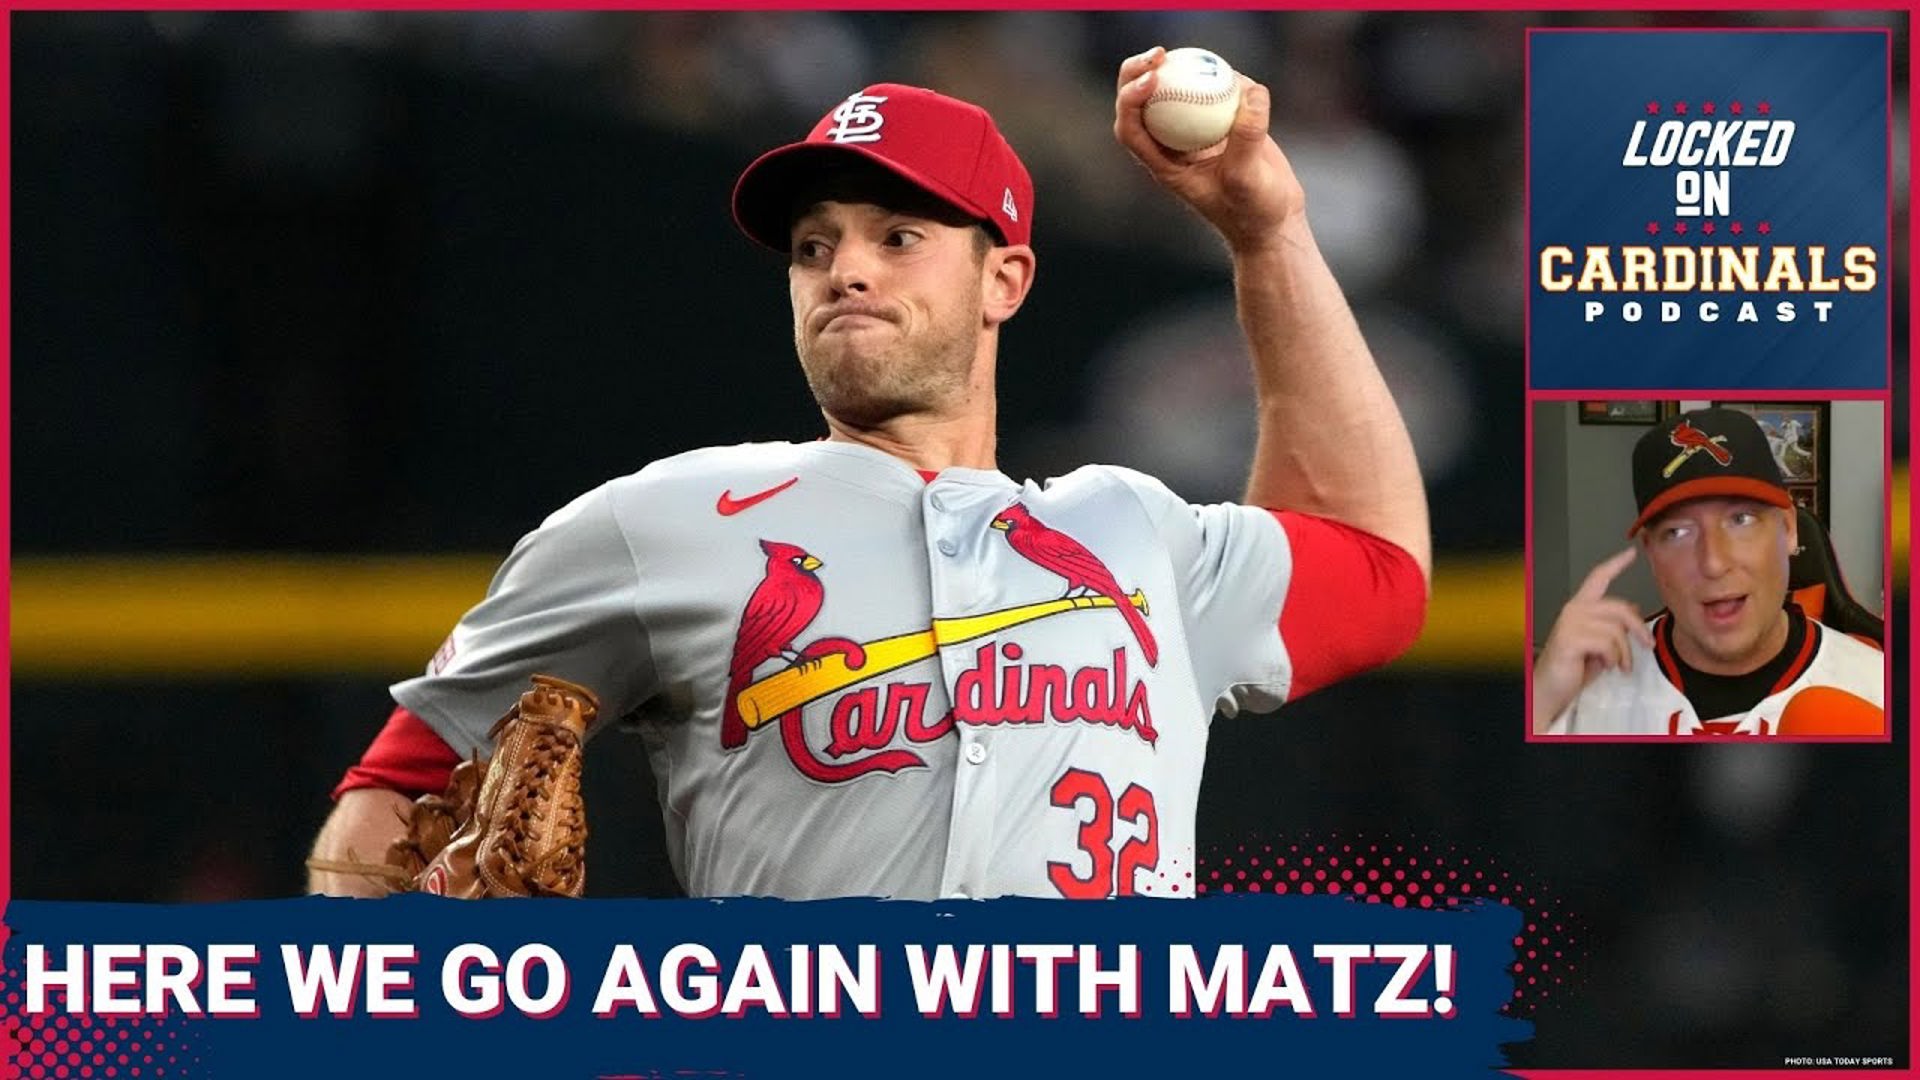 Flaherty Dominates But The Cardinals Comeback To Win, Matz And Gallegos Get Shelled in Game 2